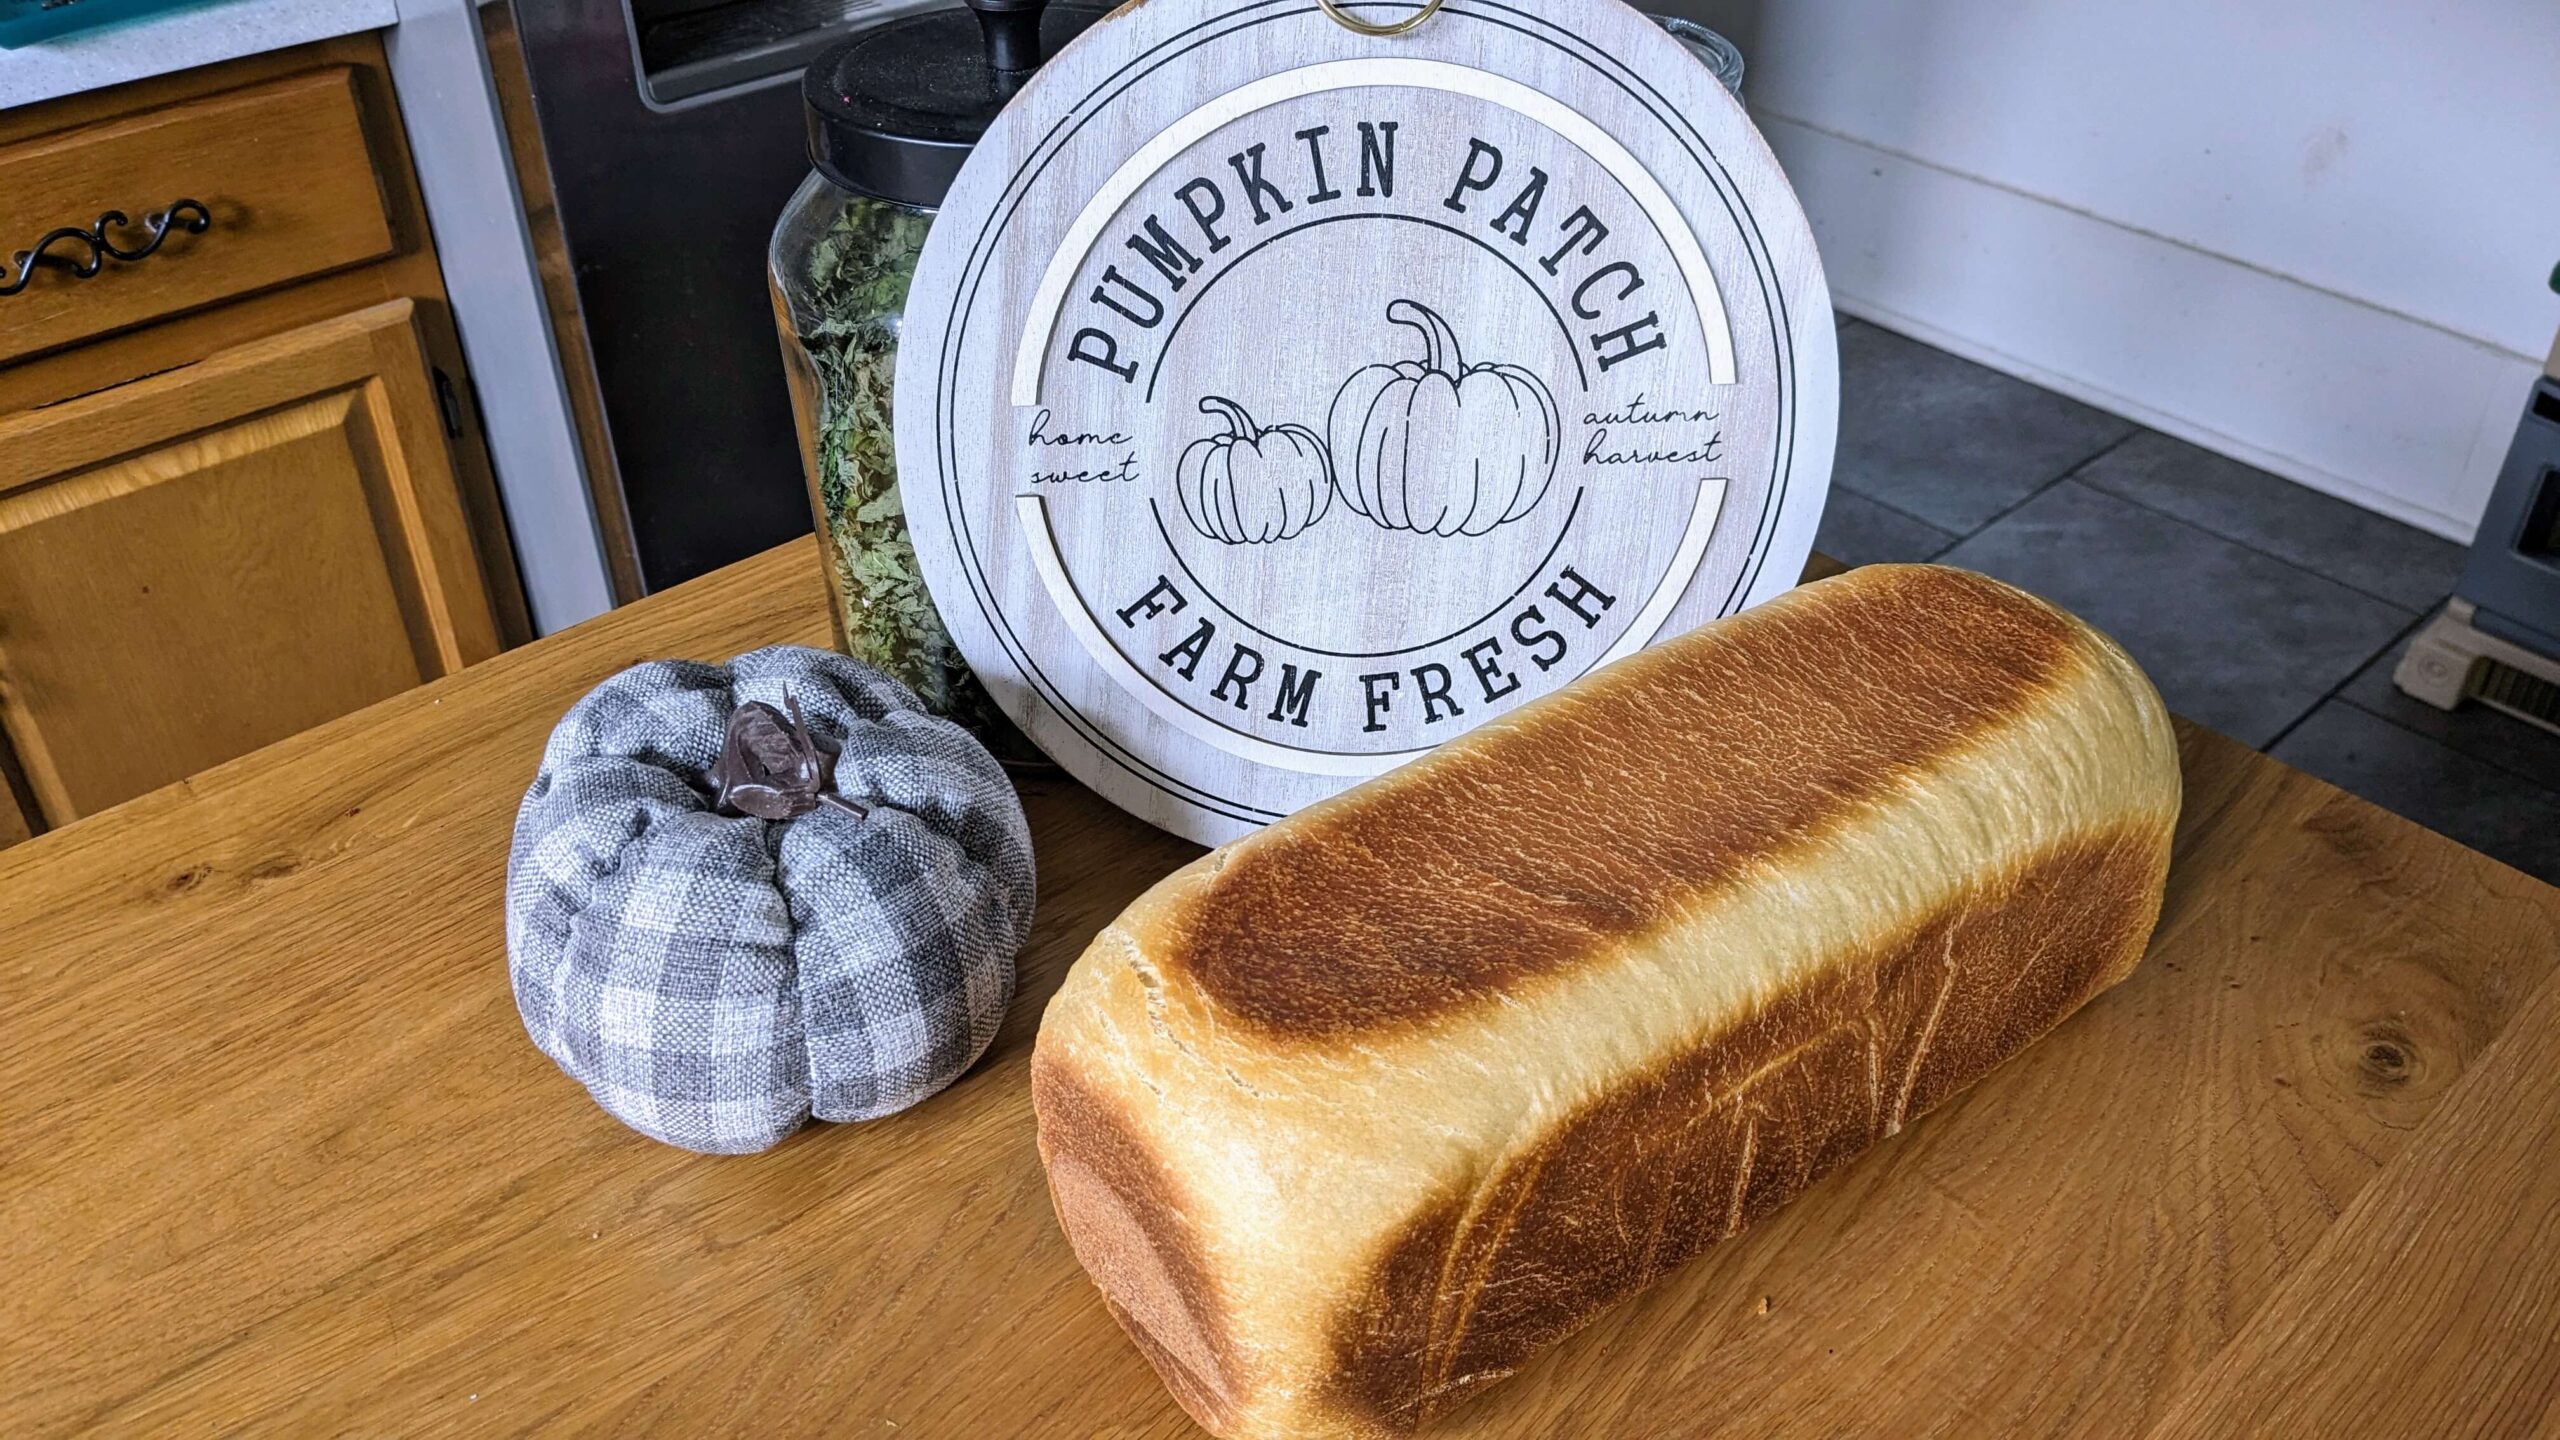 uncut sourdough sandwich loaf in front of a grey plaid pumpkin and a pumpkin patch round sign